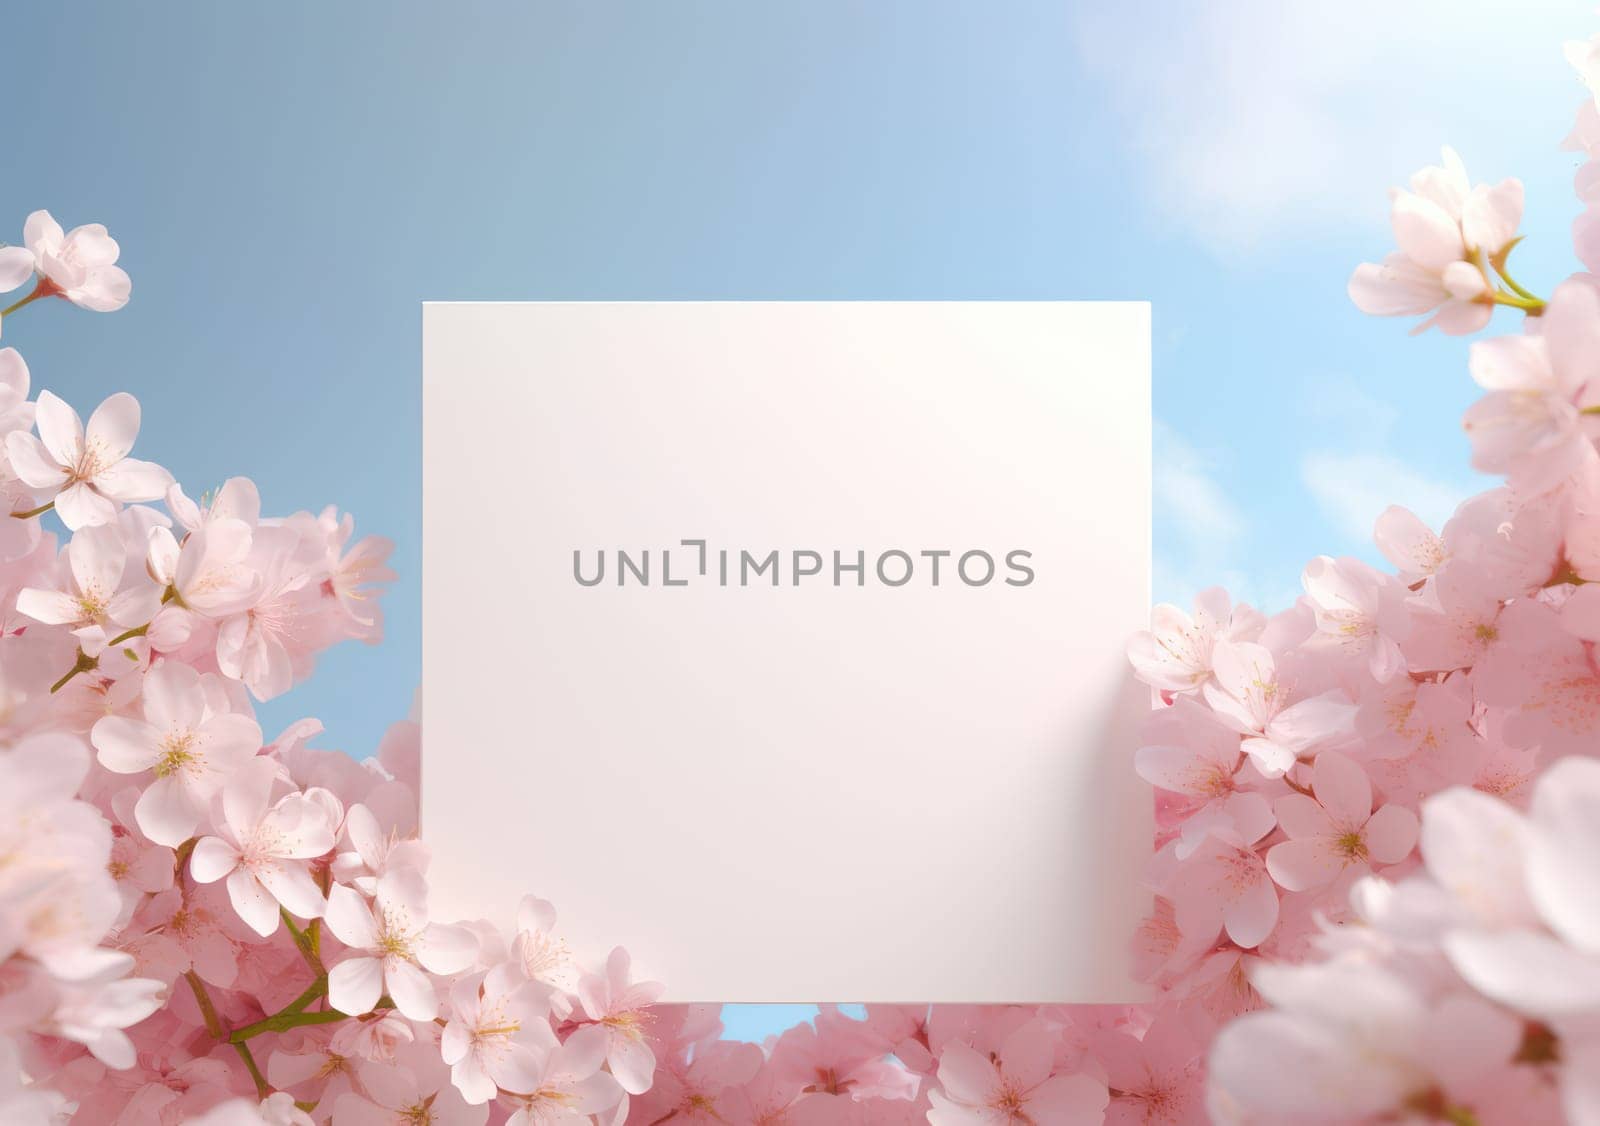 Spring Floral Composition: Blossoming Sakura Branch on White Background, Perfect for Greeting Card or Gift, Romantic and Fresh, Japanese Cherry Blossoms in Pastel Pink and White Petals, Nature's Beauty in a Frame.